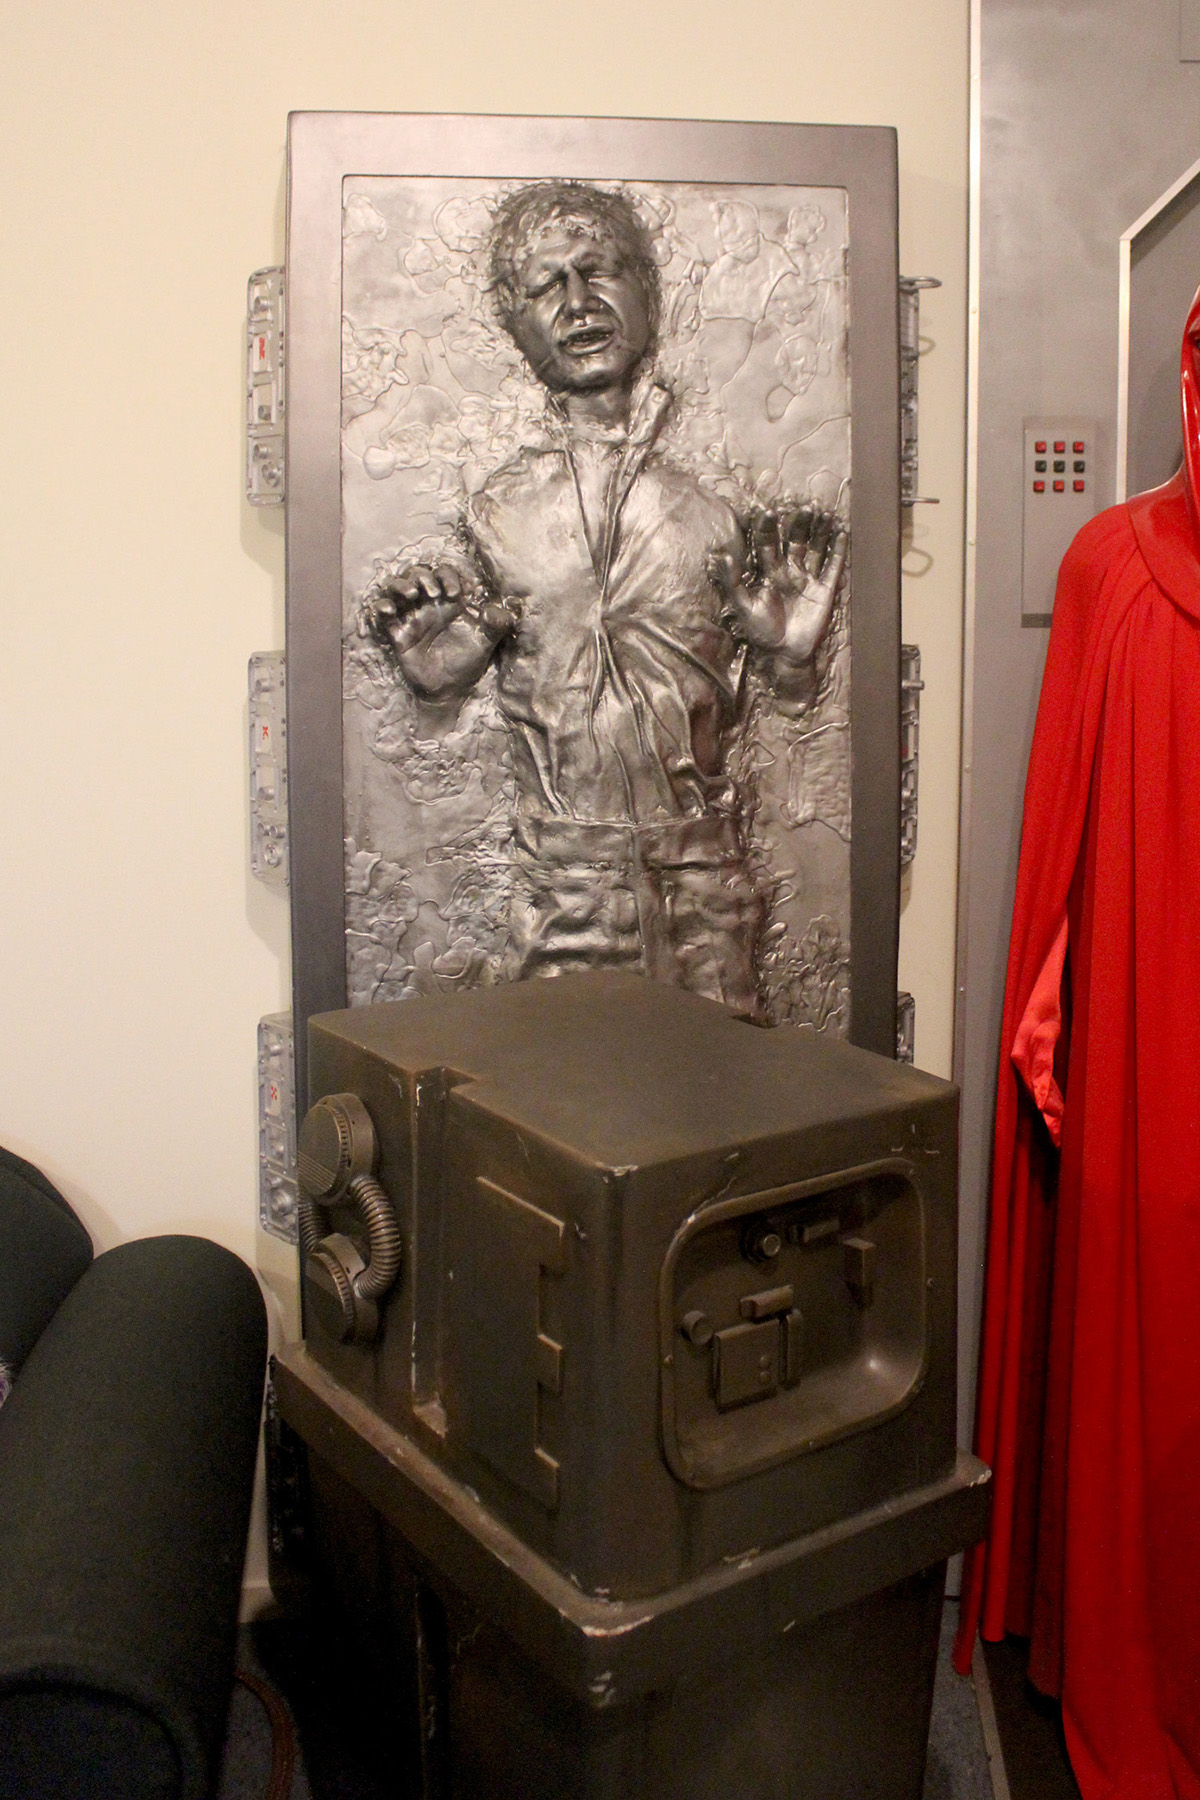 Life-size statue display - Han-in-carbonite, gonk droid